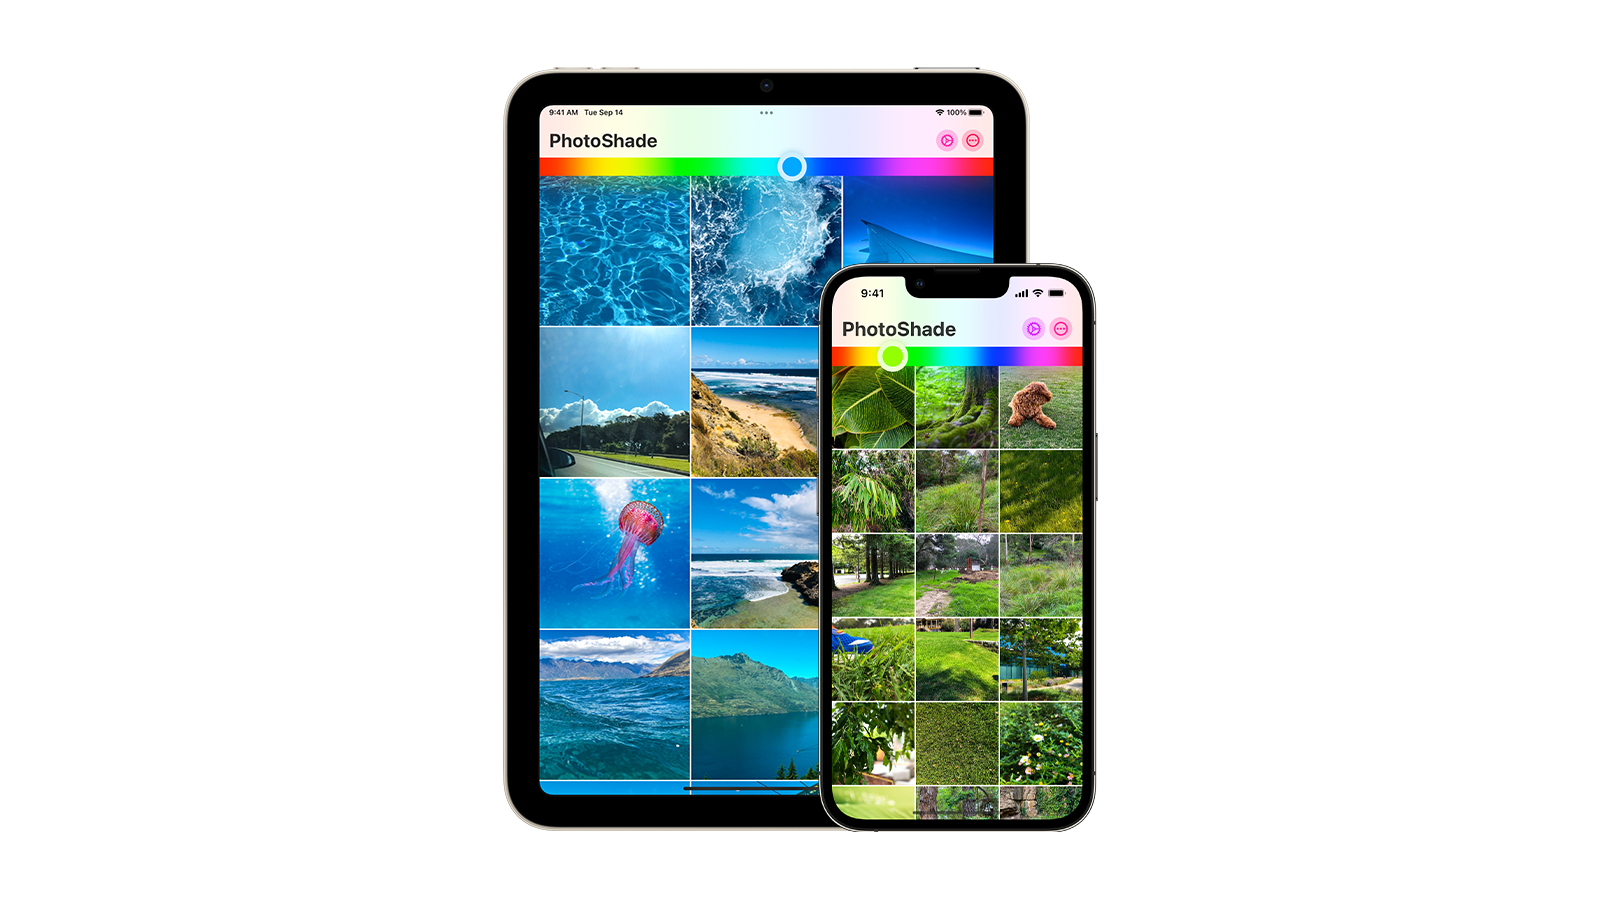 An iPad and and iPhone with screenshots of PhotoShade